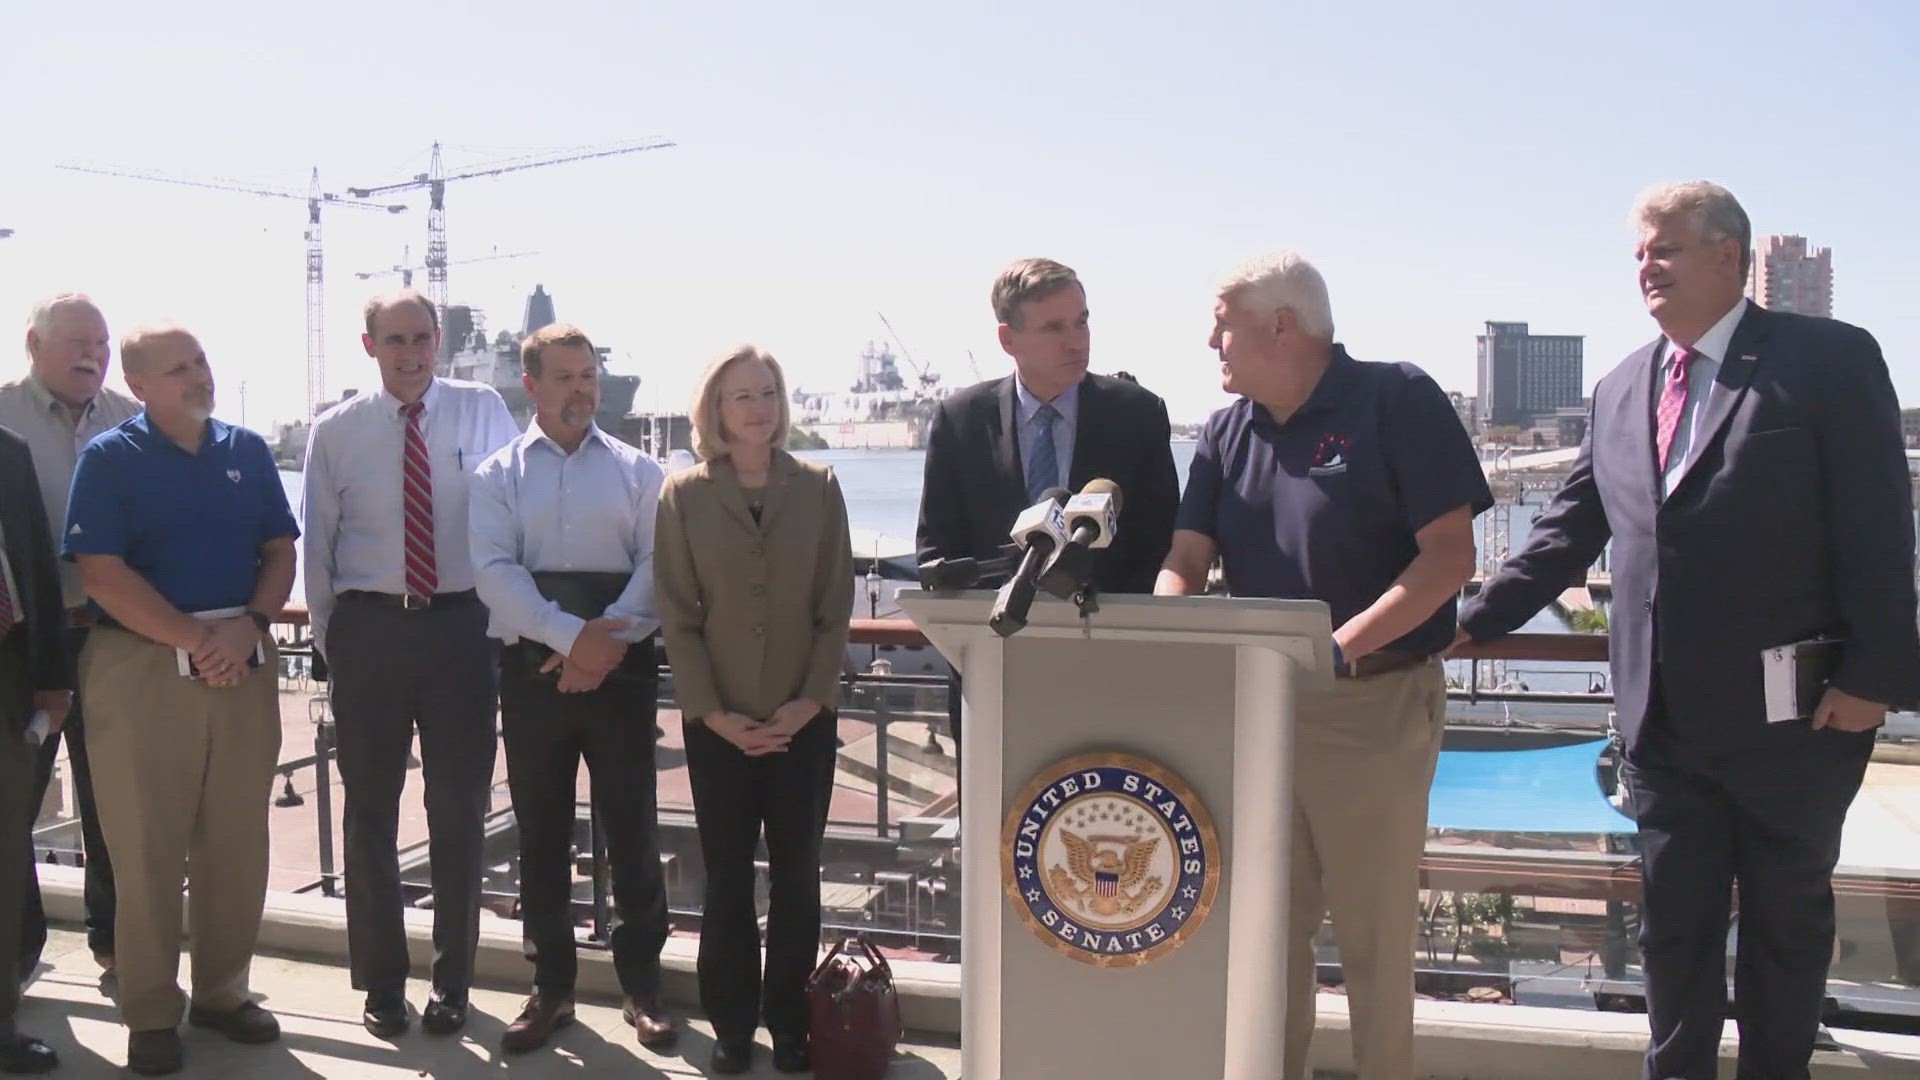 Sen. Mark Warner, appearing with shipyard executives on Norfolk waterfront, calls federal budget delays "completely irresponsible."